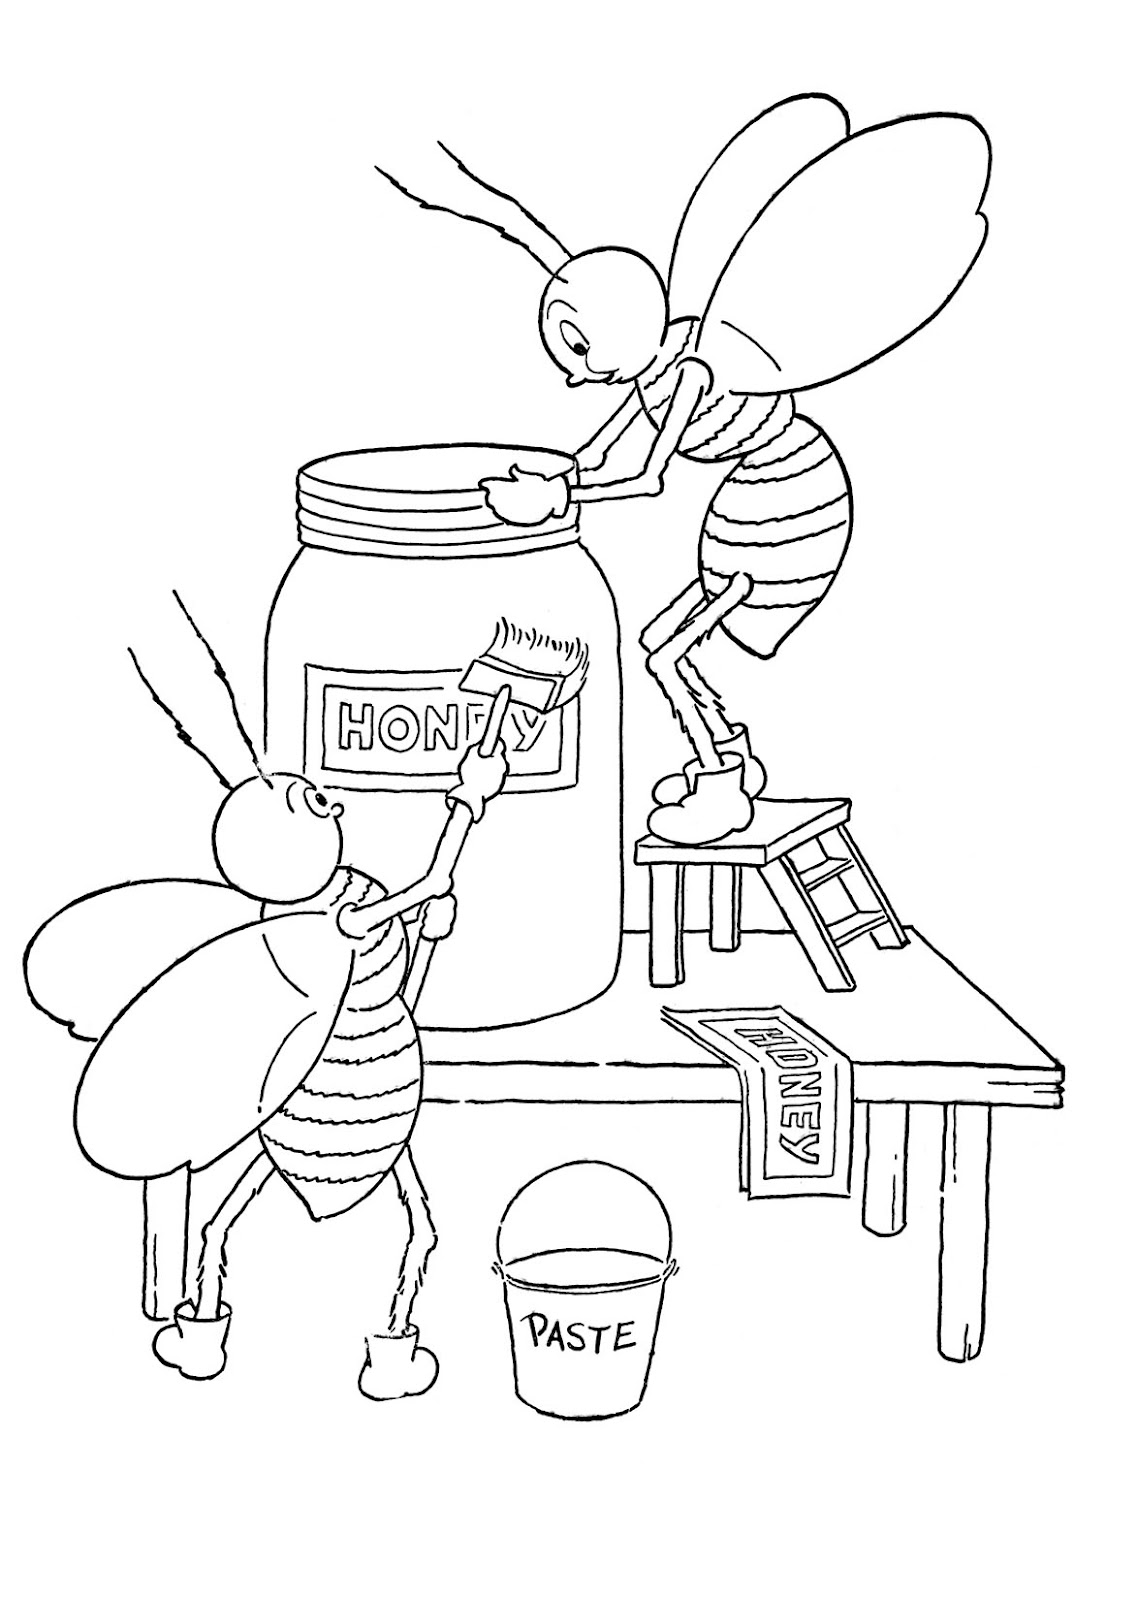 Kids Printable - Honey Bees Coloring Page - The Graphics Fairy